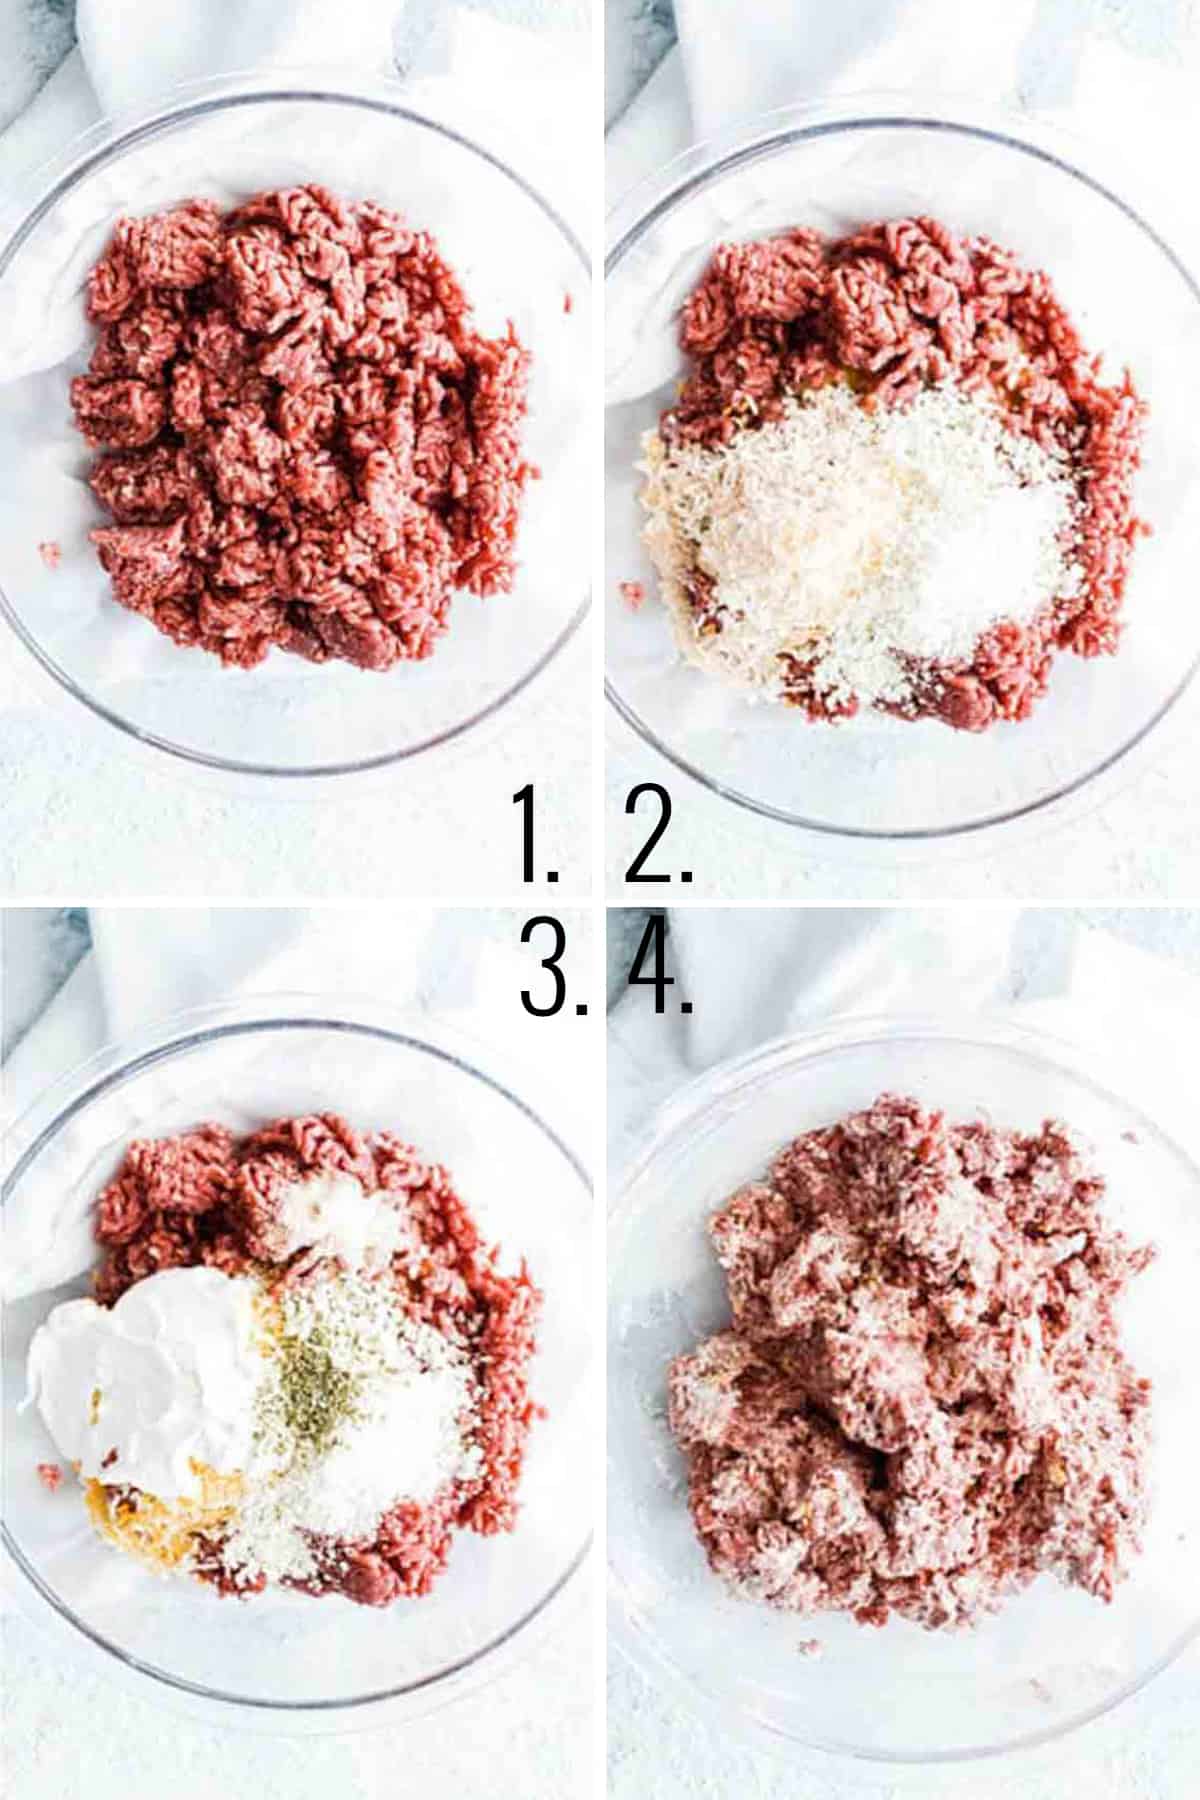 Step by step showing how to mix up the homemade meatballs for sweet and sour meatballs.